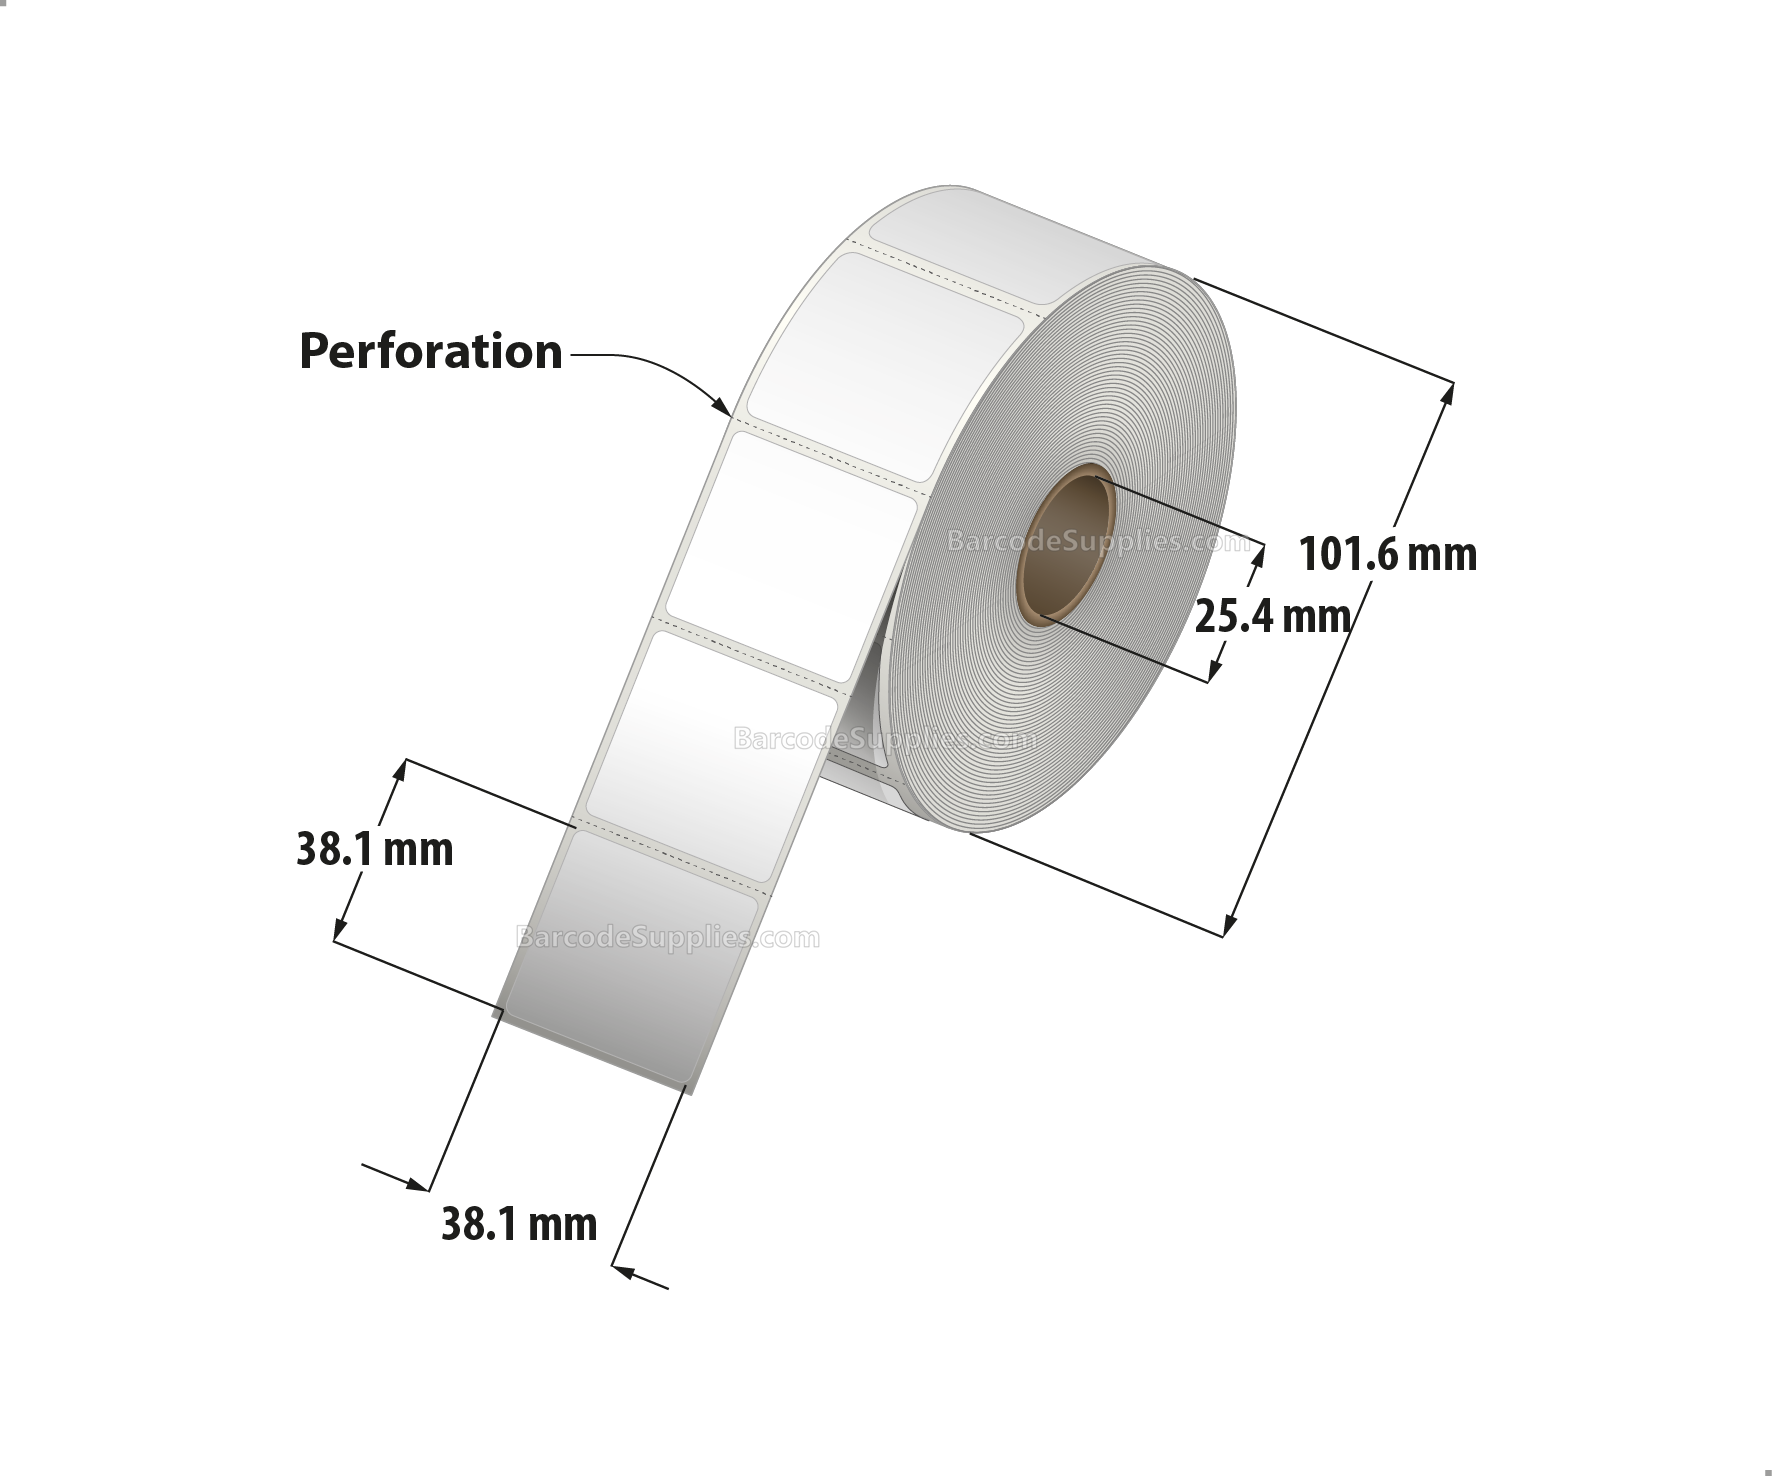 1.5 x 1.5 Direct Thermal White Labels With Acrylic Adhesive - Perforated - 960 Labels Per Roll - Carton Of 12 Rolls - 11520 Labels Total - MPN: RD-15-15-960-1